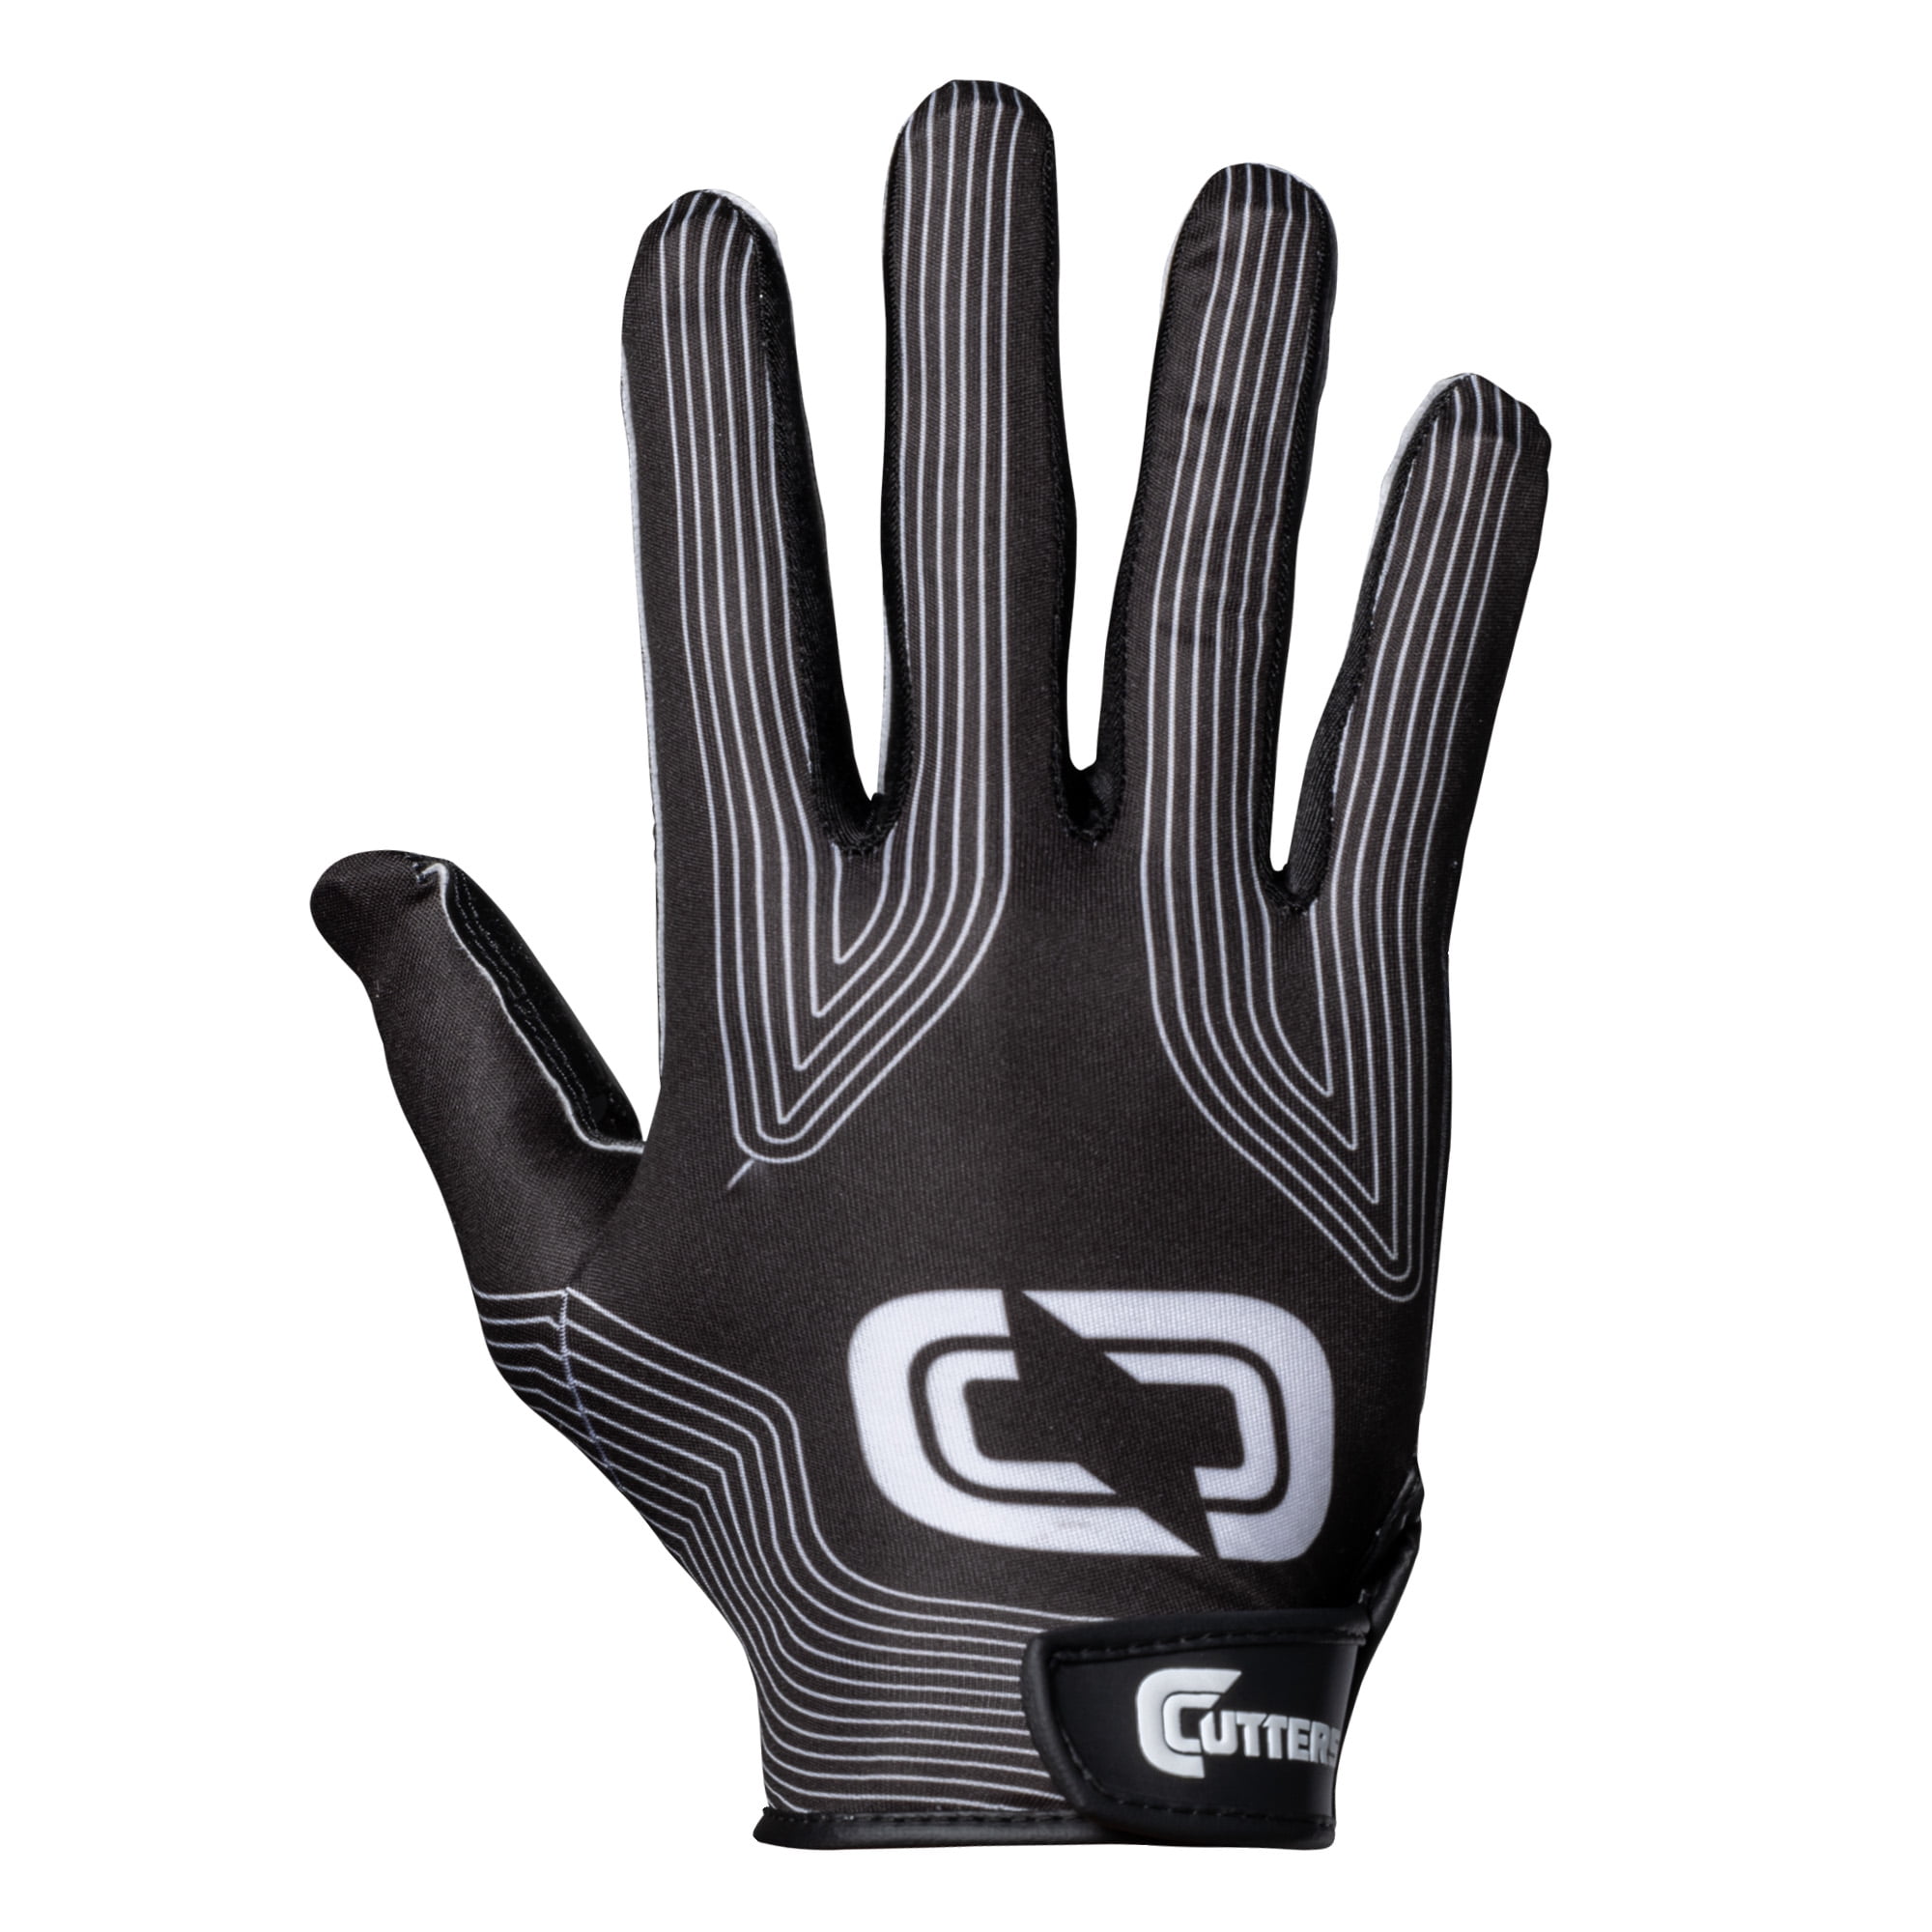 Cutters Epic Football Receiver Glove, Black, Youth, Large/Extra Large